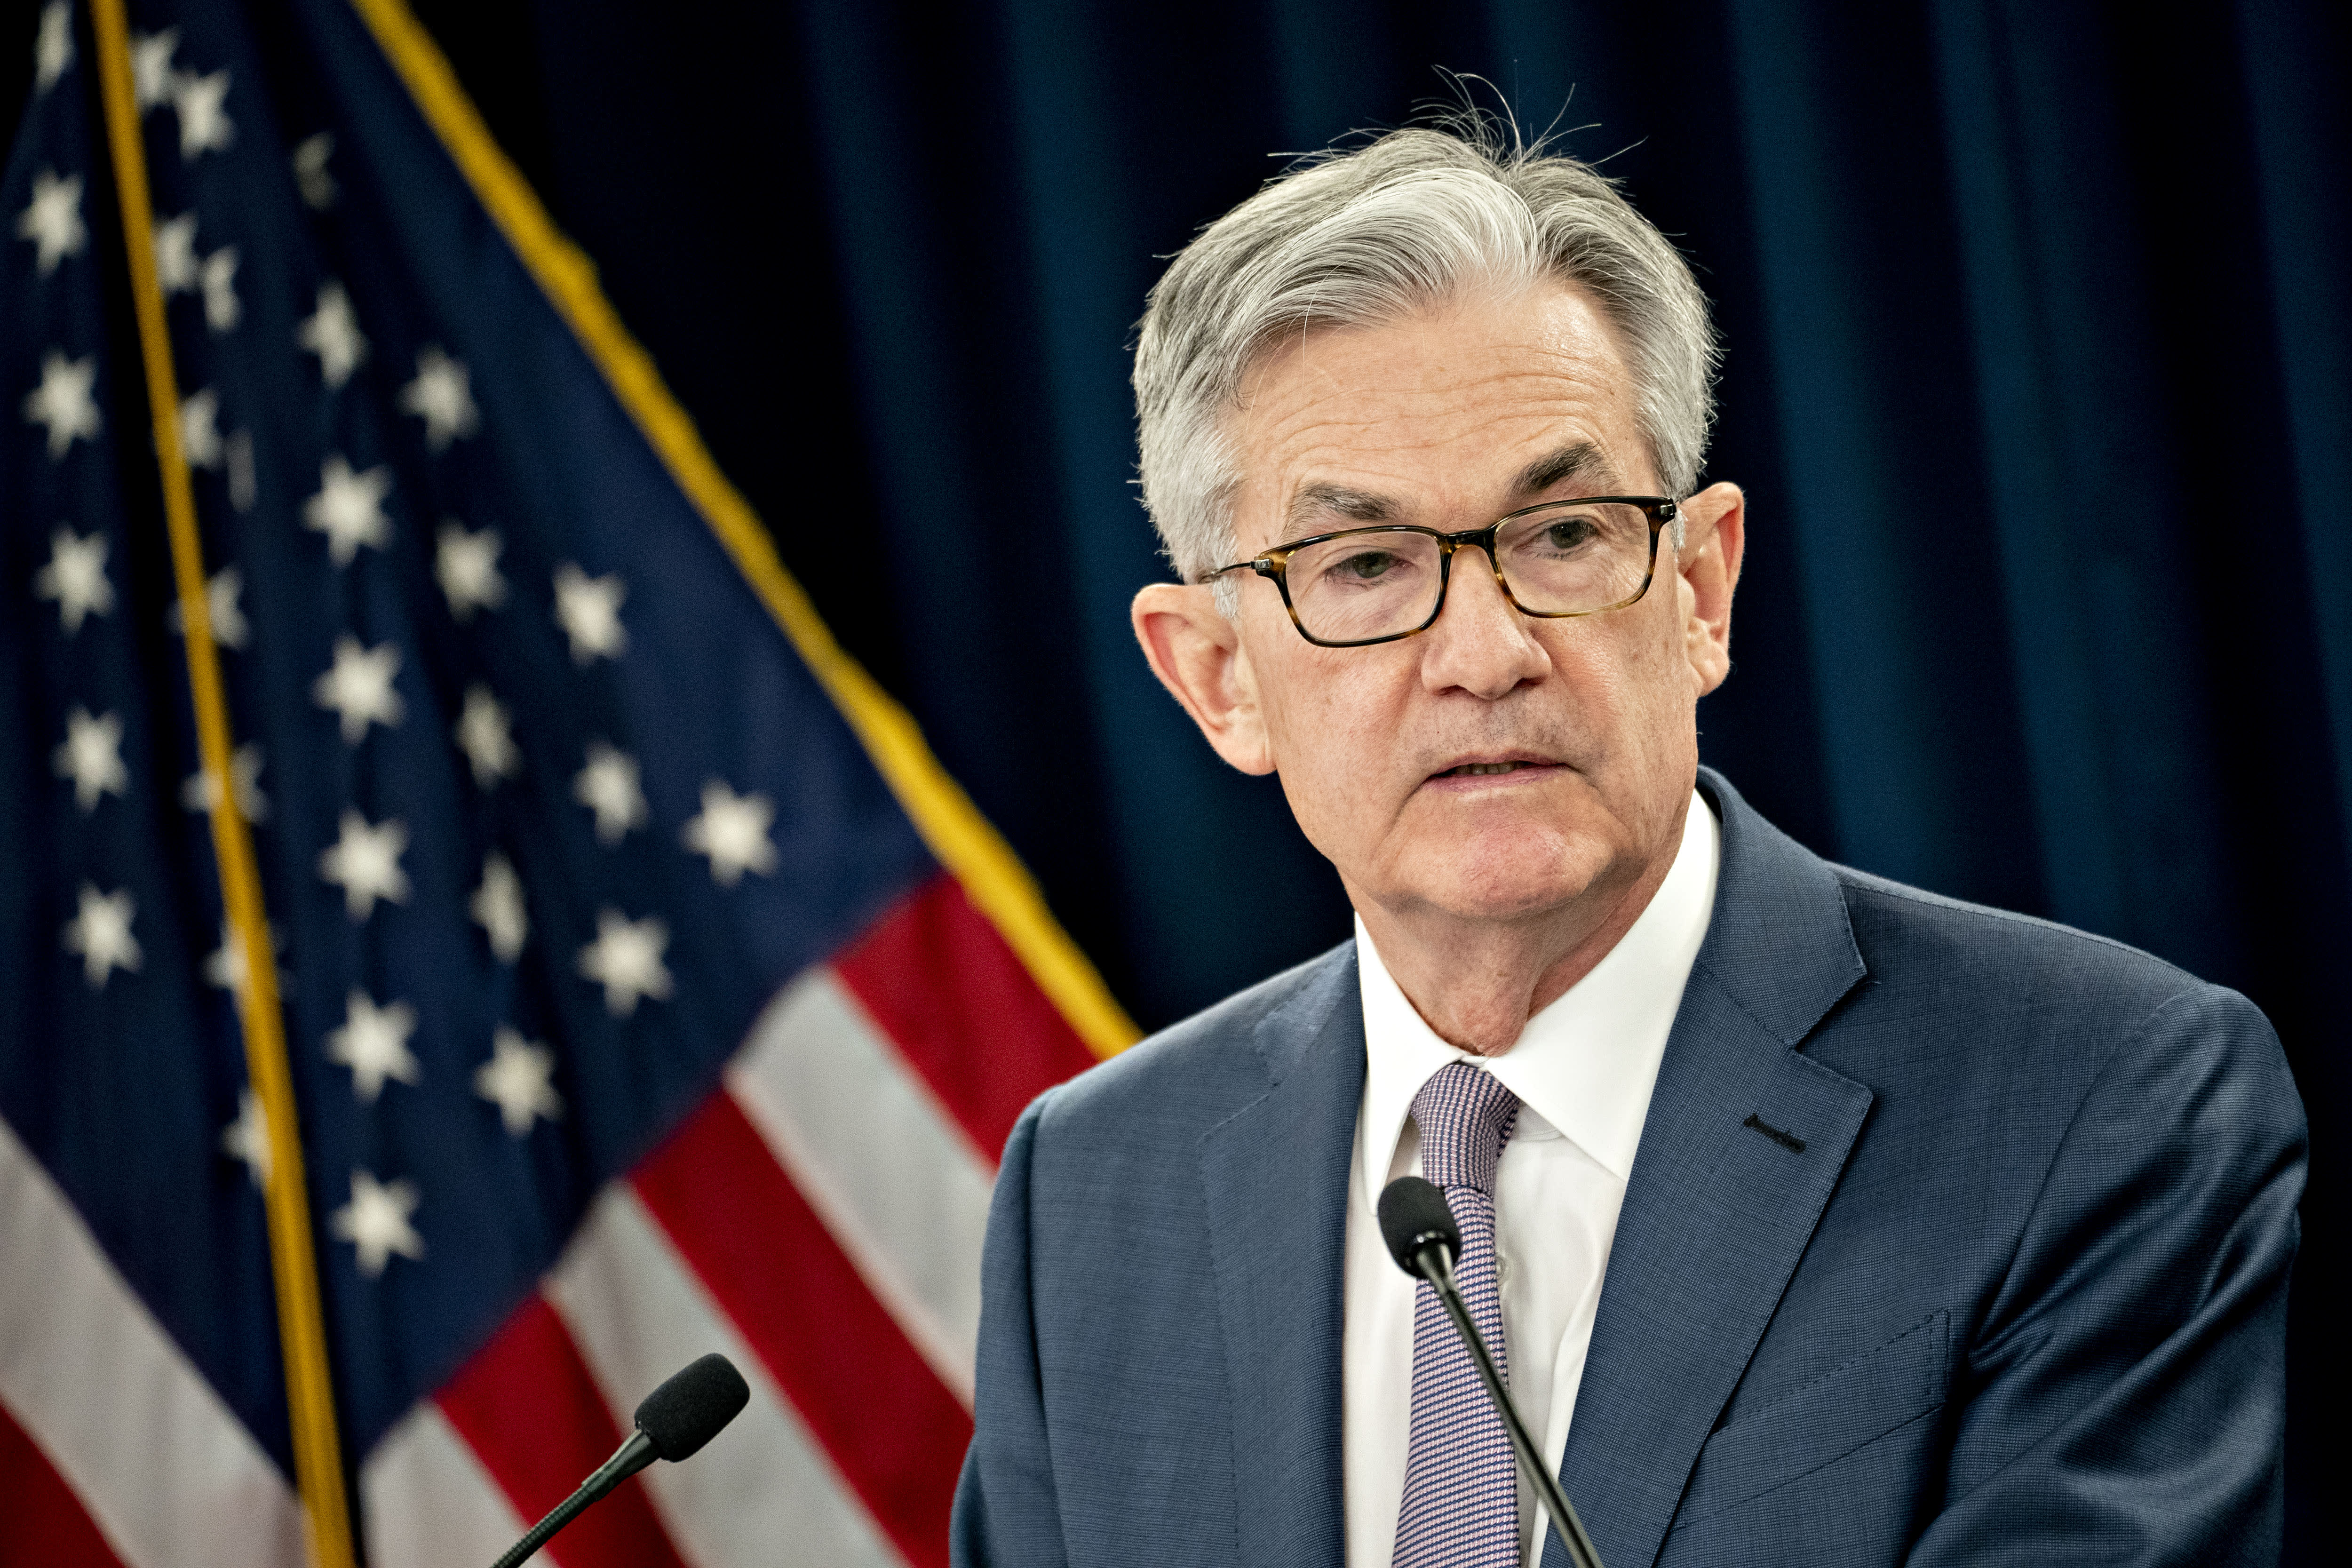 Minutes show Fed ready to raise rates shrink balance sheet soon – CNBC